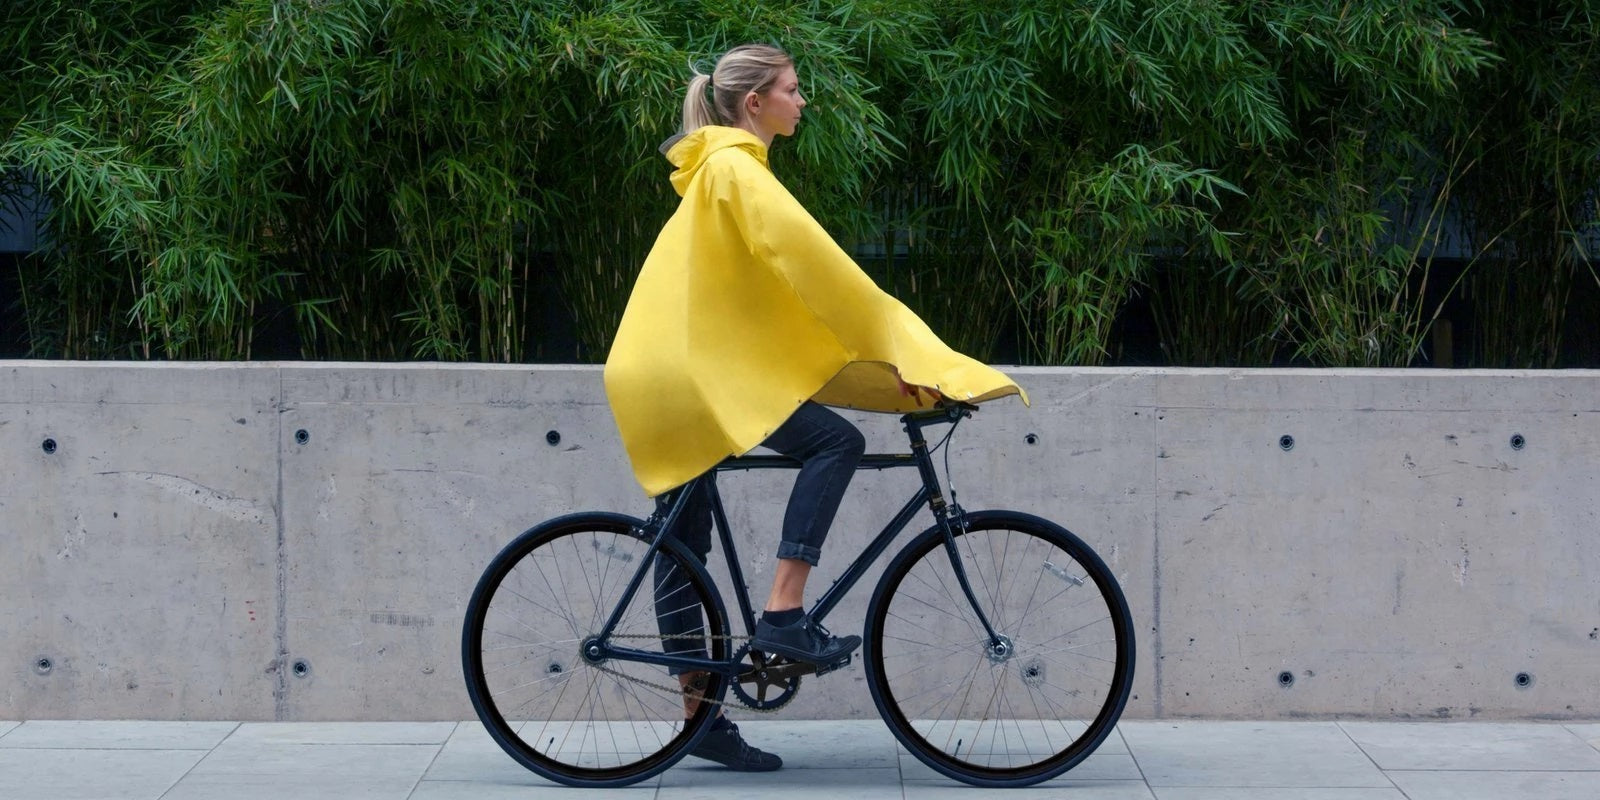 more than just a superhero cape" - Total Cycling The People's Rain Wear